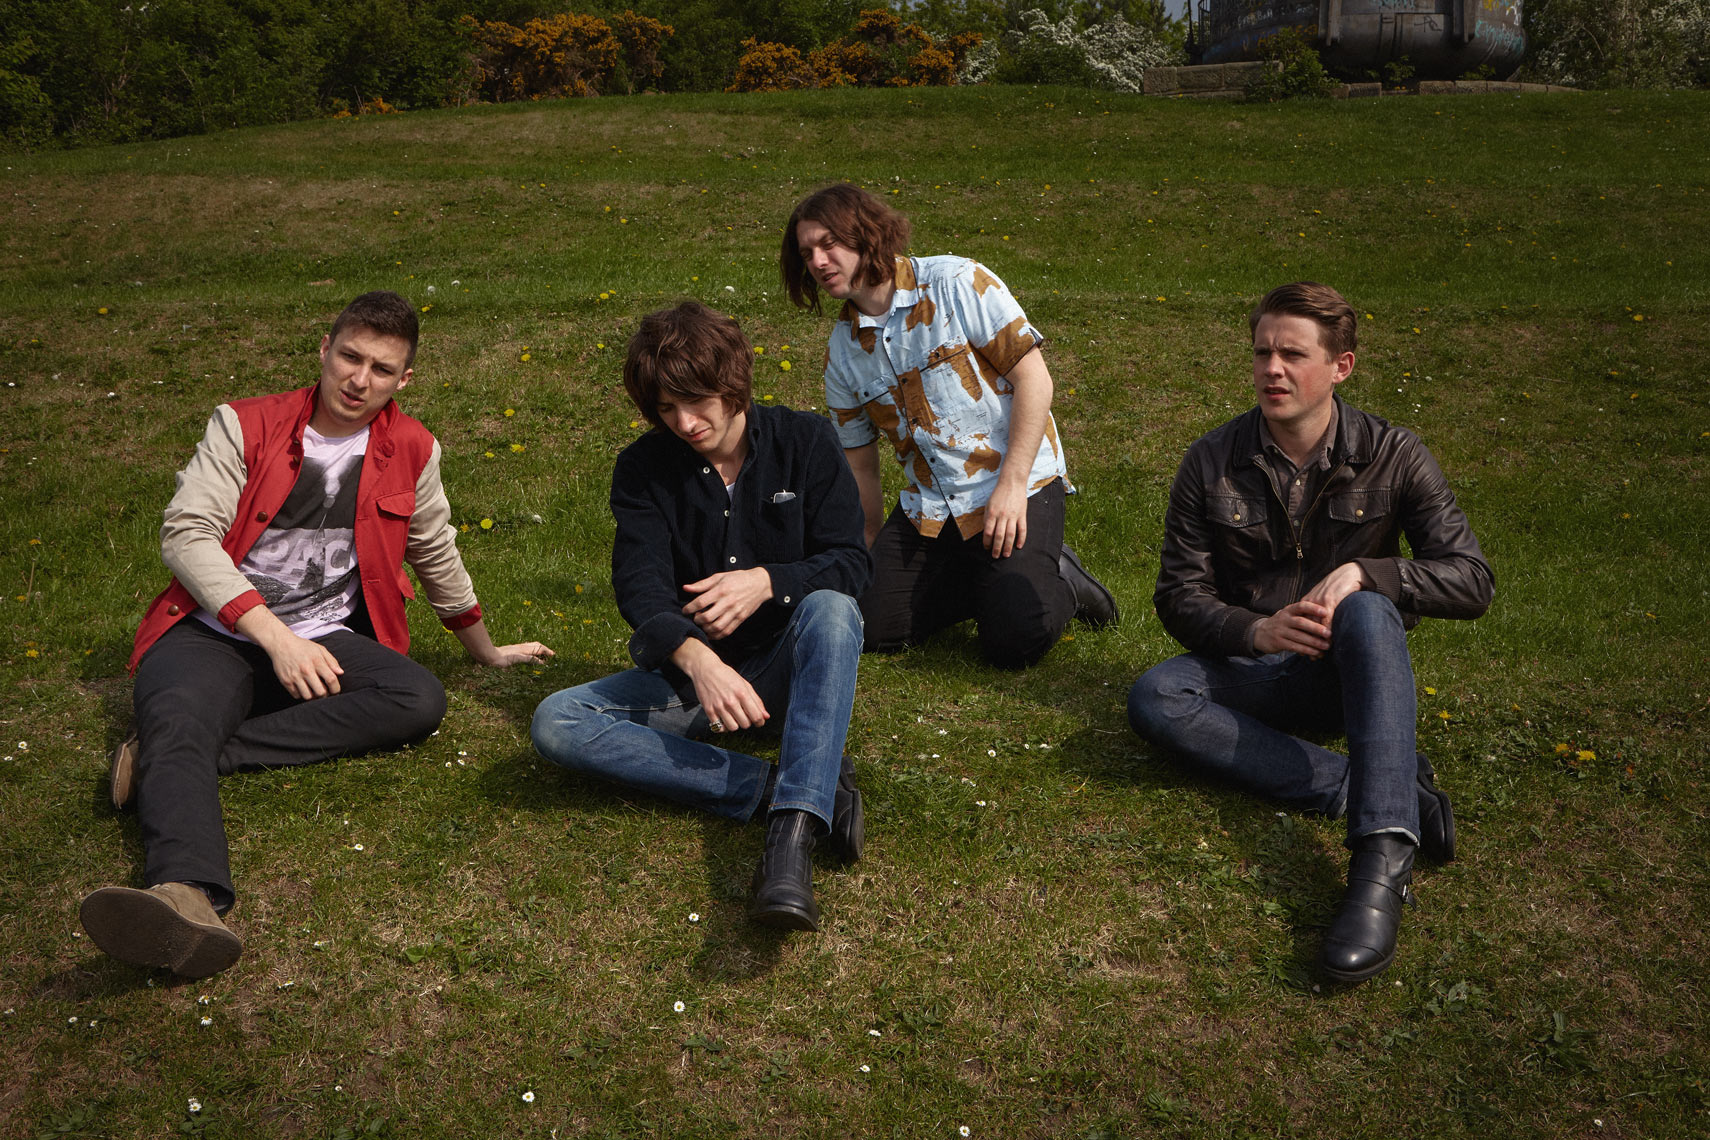 Arctic Monkeys by Tom Oxley